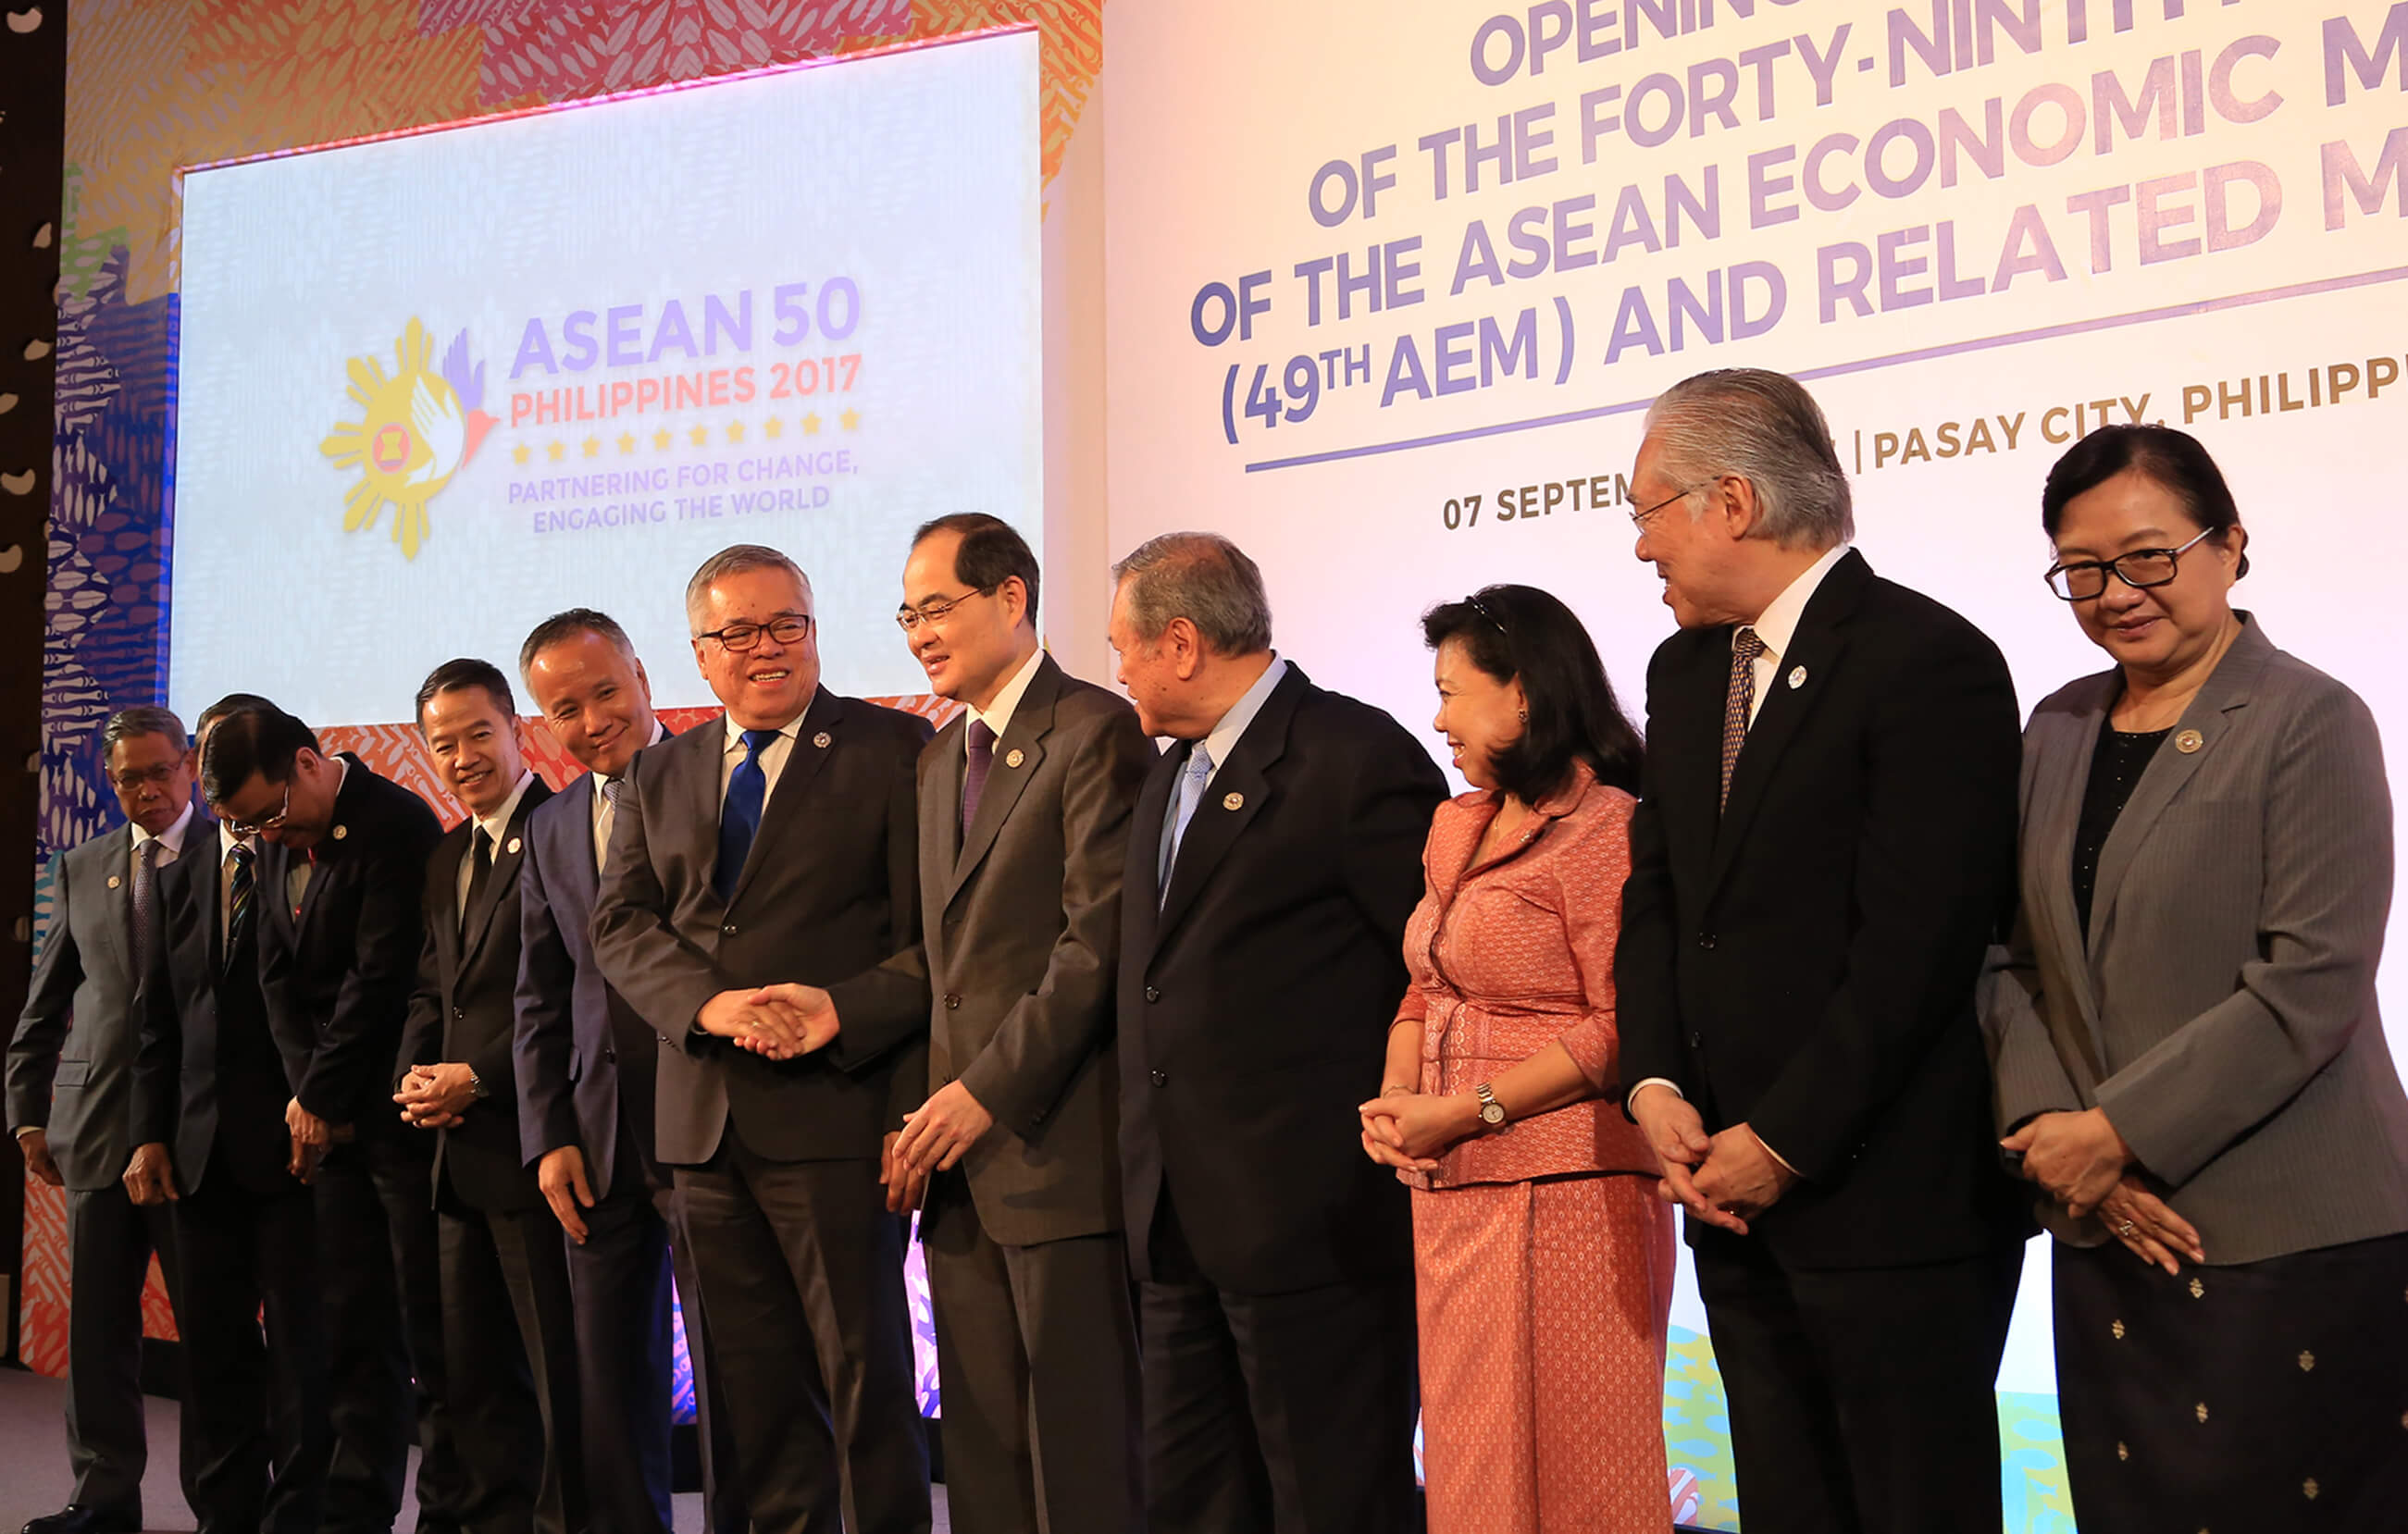 49th ASEAN Economic Ministers Meeting